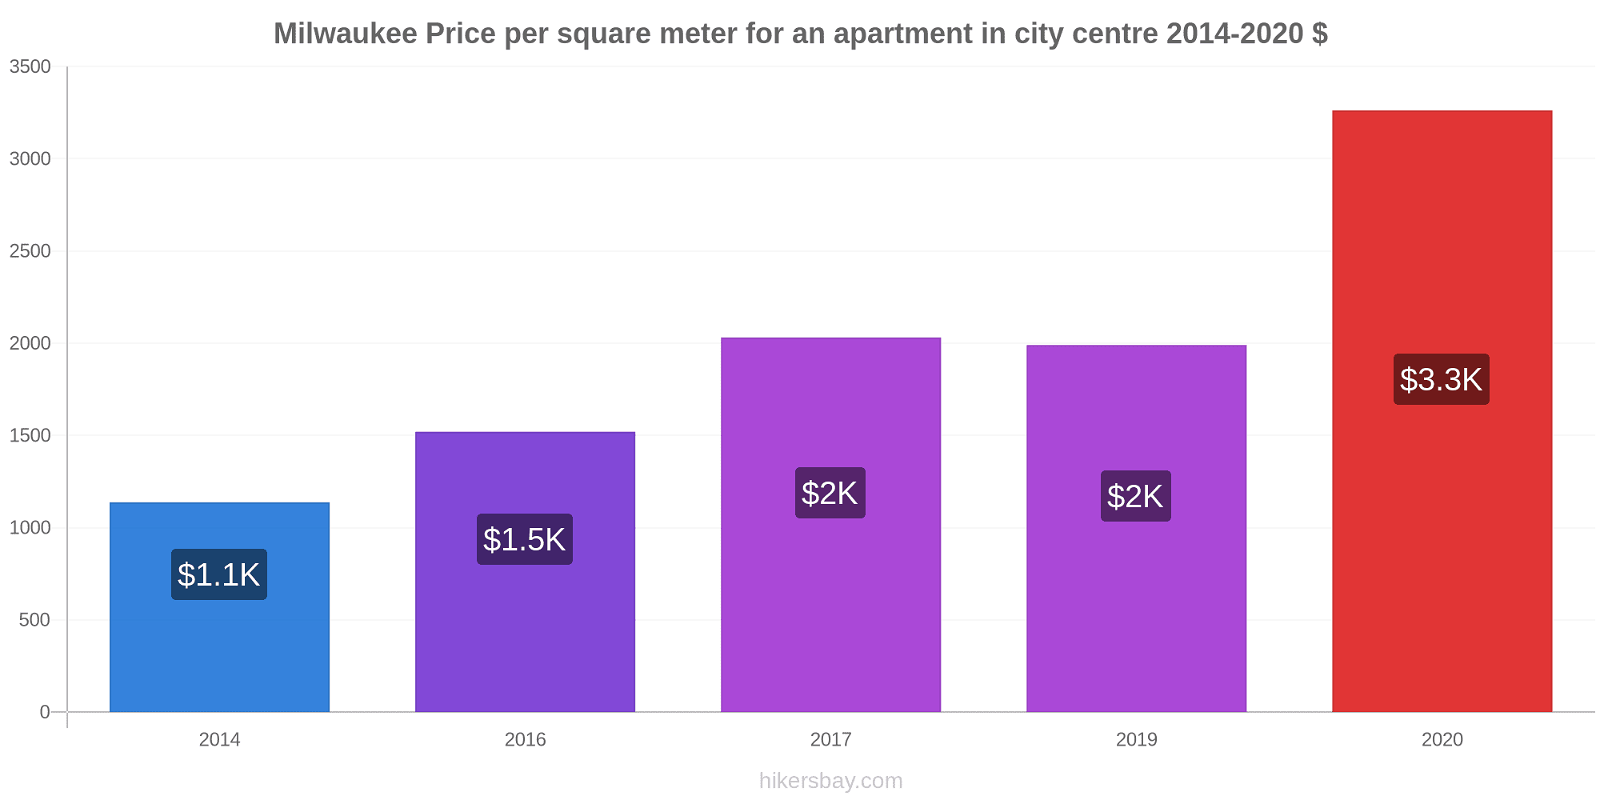 Milwaukee price changes Price per square meter for an apartment in city centre hikersbay.com